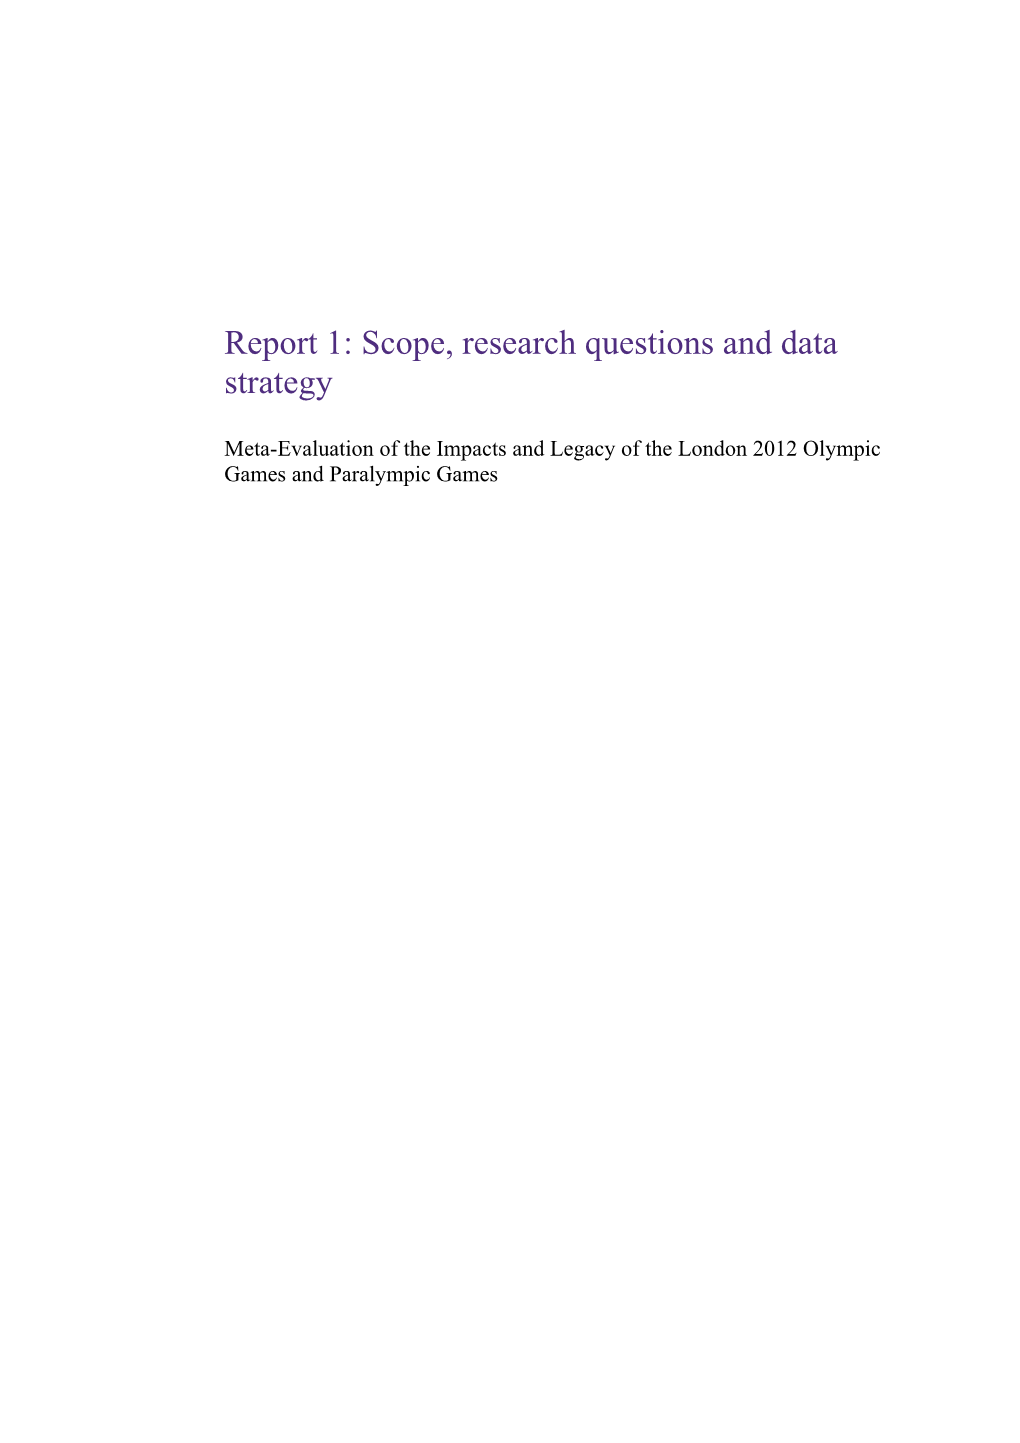 Report 1: Scope, Research Questions and Data Strategy